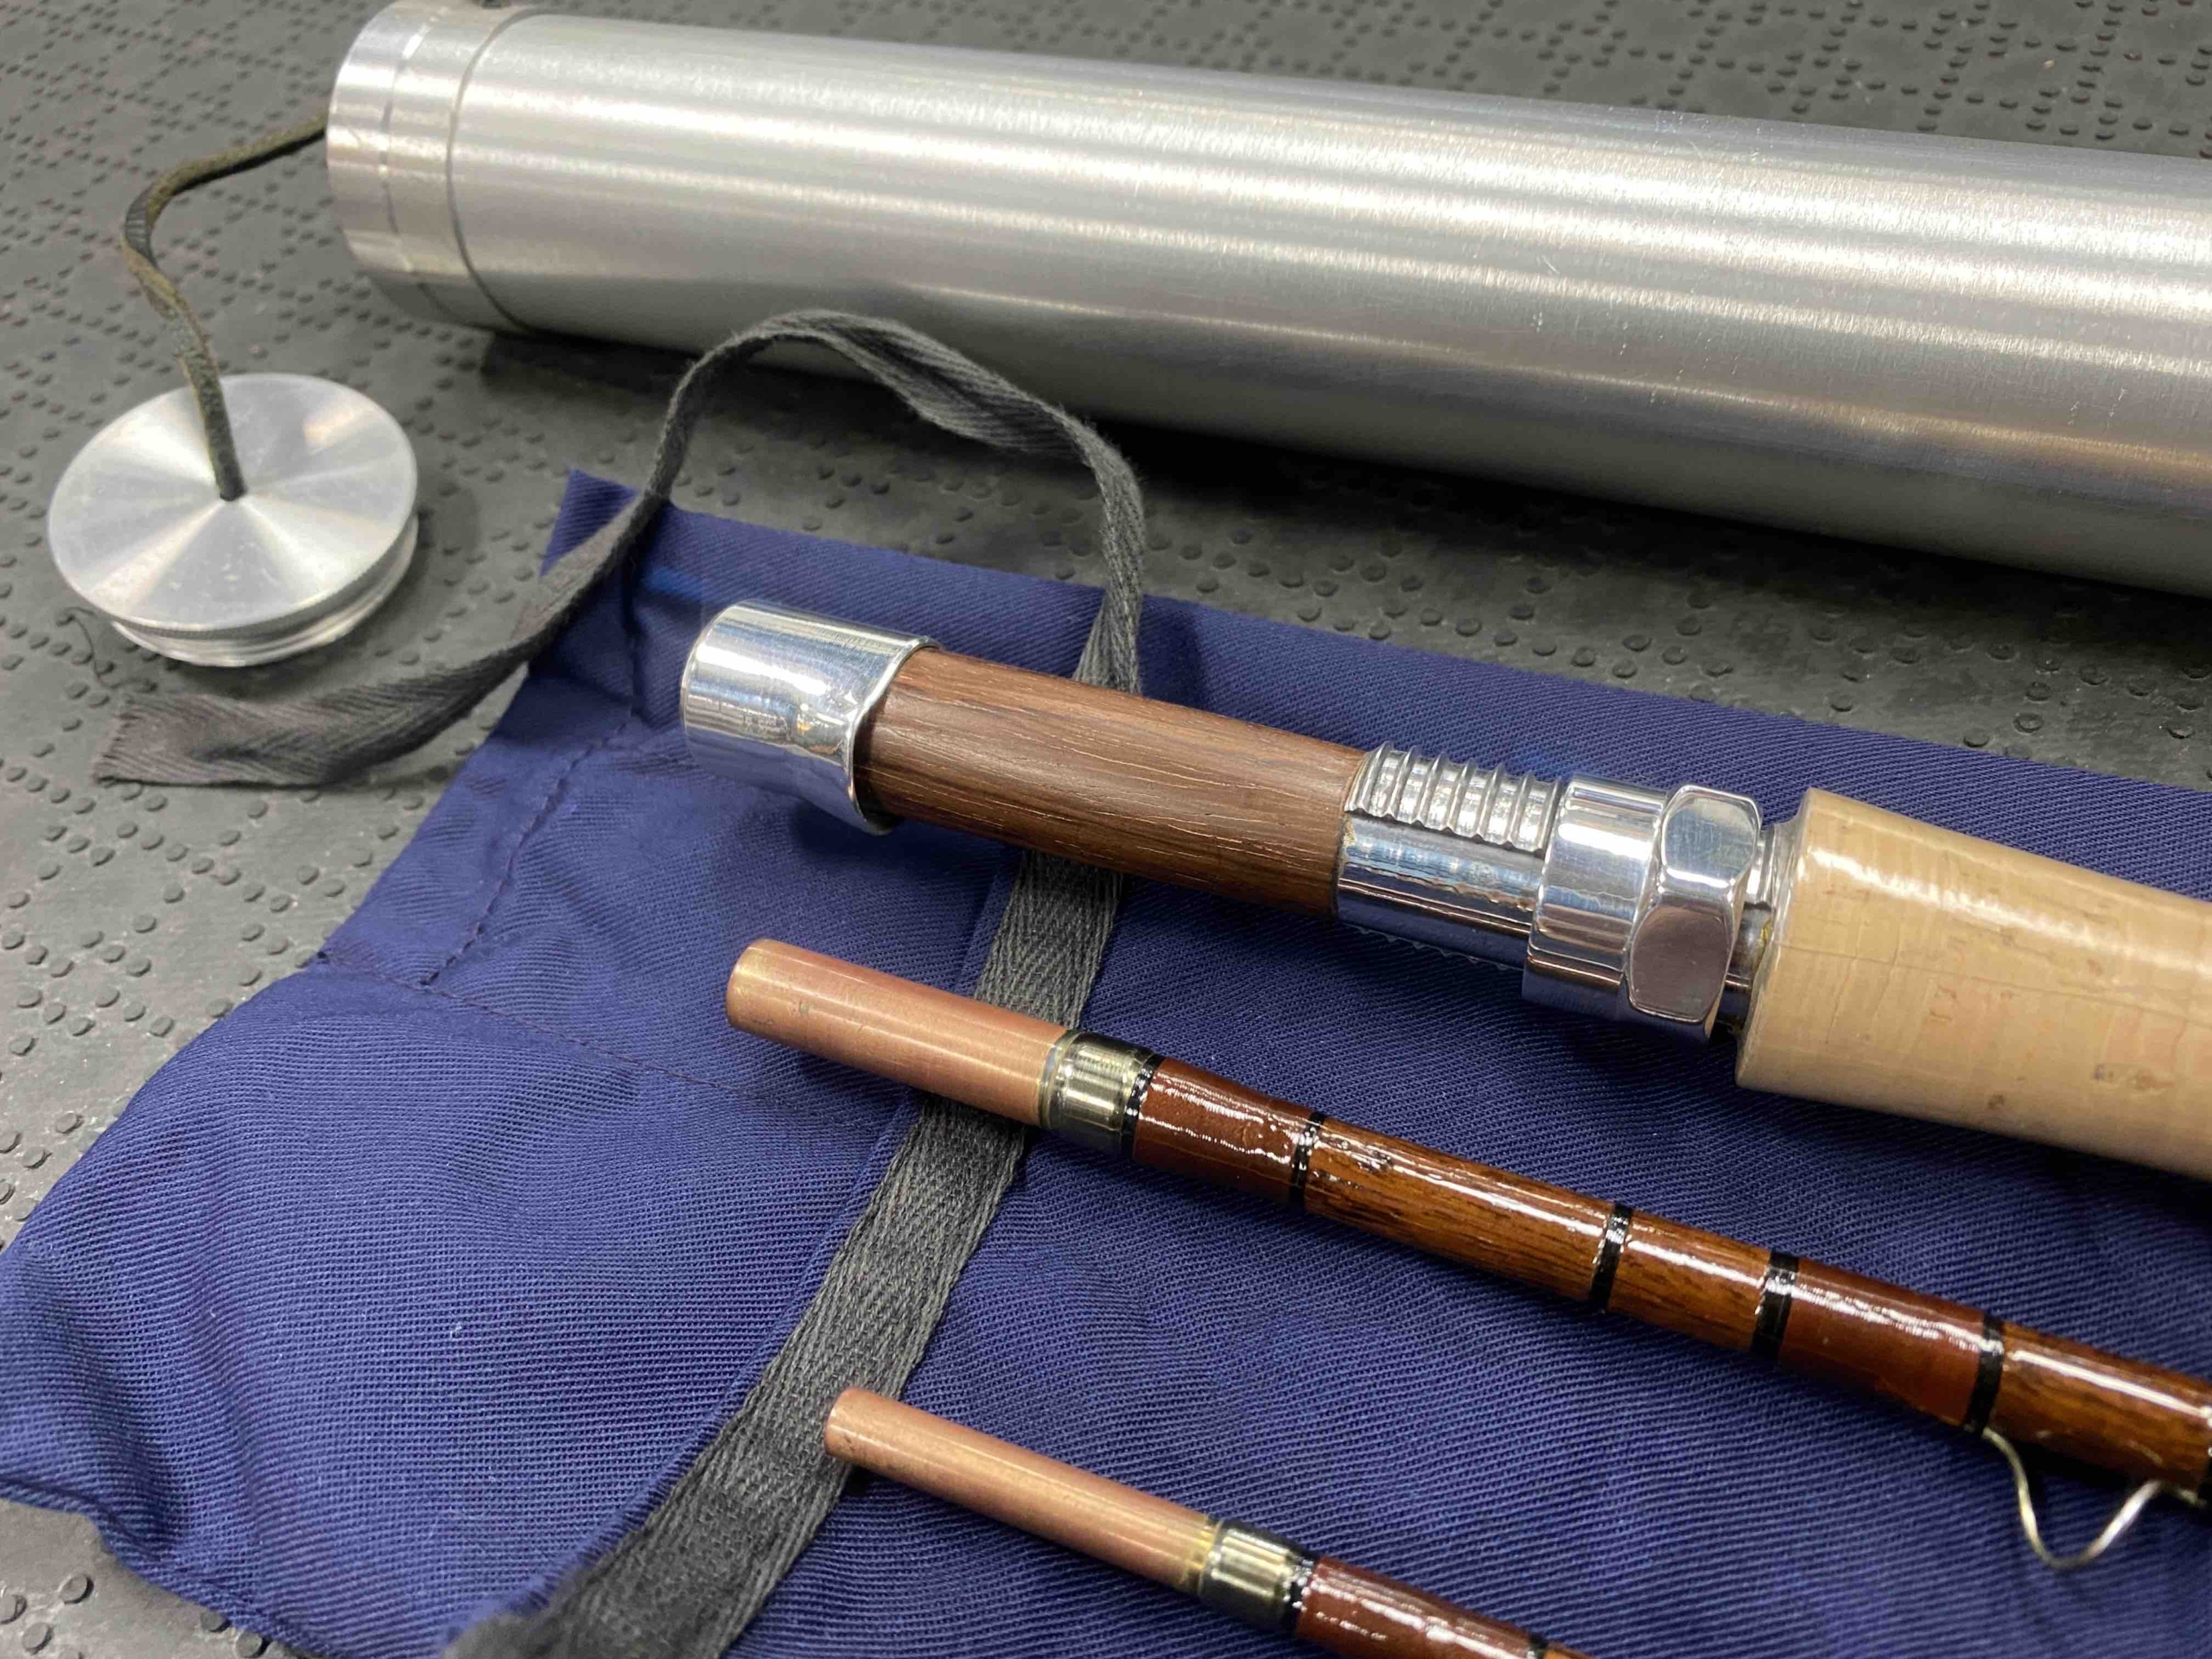 https://thefirstcast.ca/wp-content/uploads/2020/10/Partridge-of-Redditch-Greenheart-Bamboo-Fly-Rod-Special-Build-for-1980-8-Foot-6-Weight-3pc-Izaak-Walton-Fly-Fishing-Club-BB-scaled.jpg